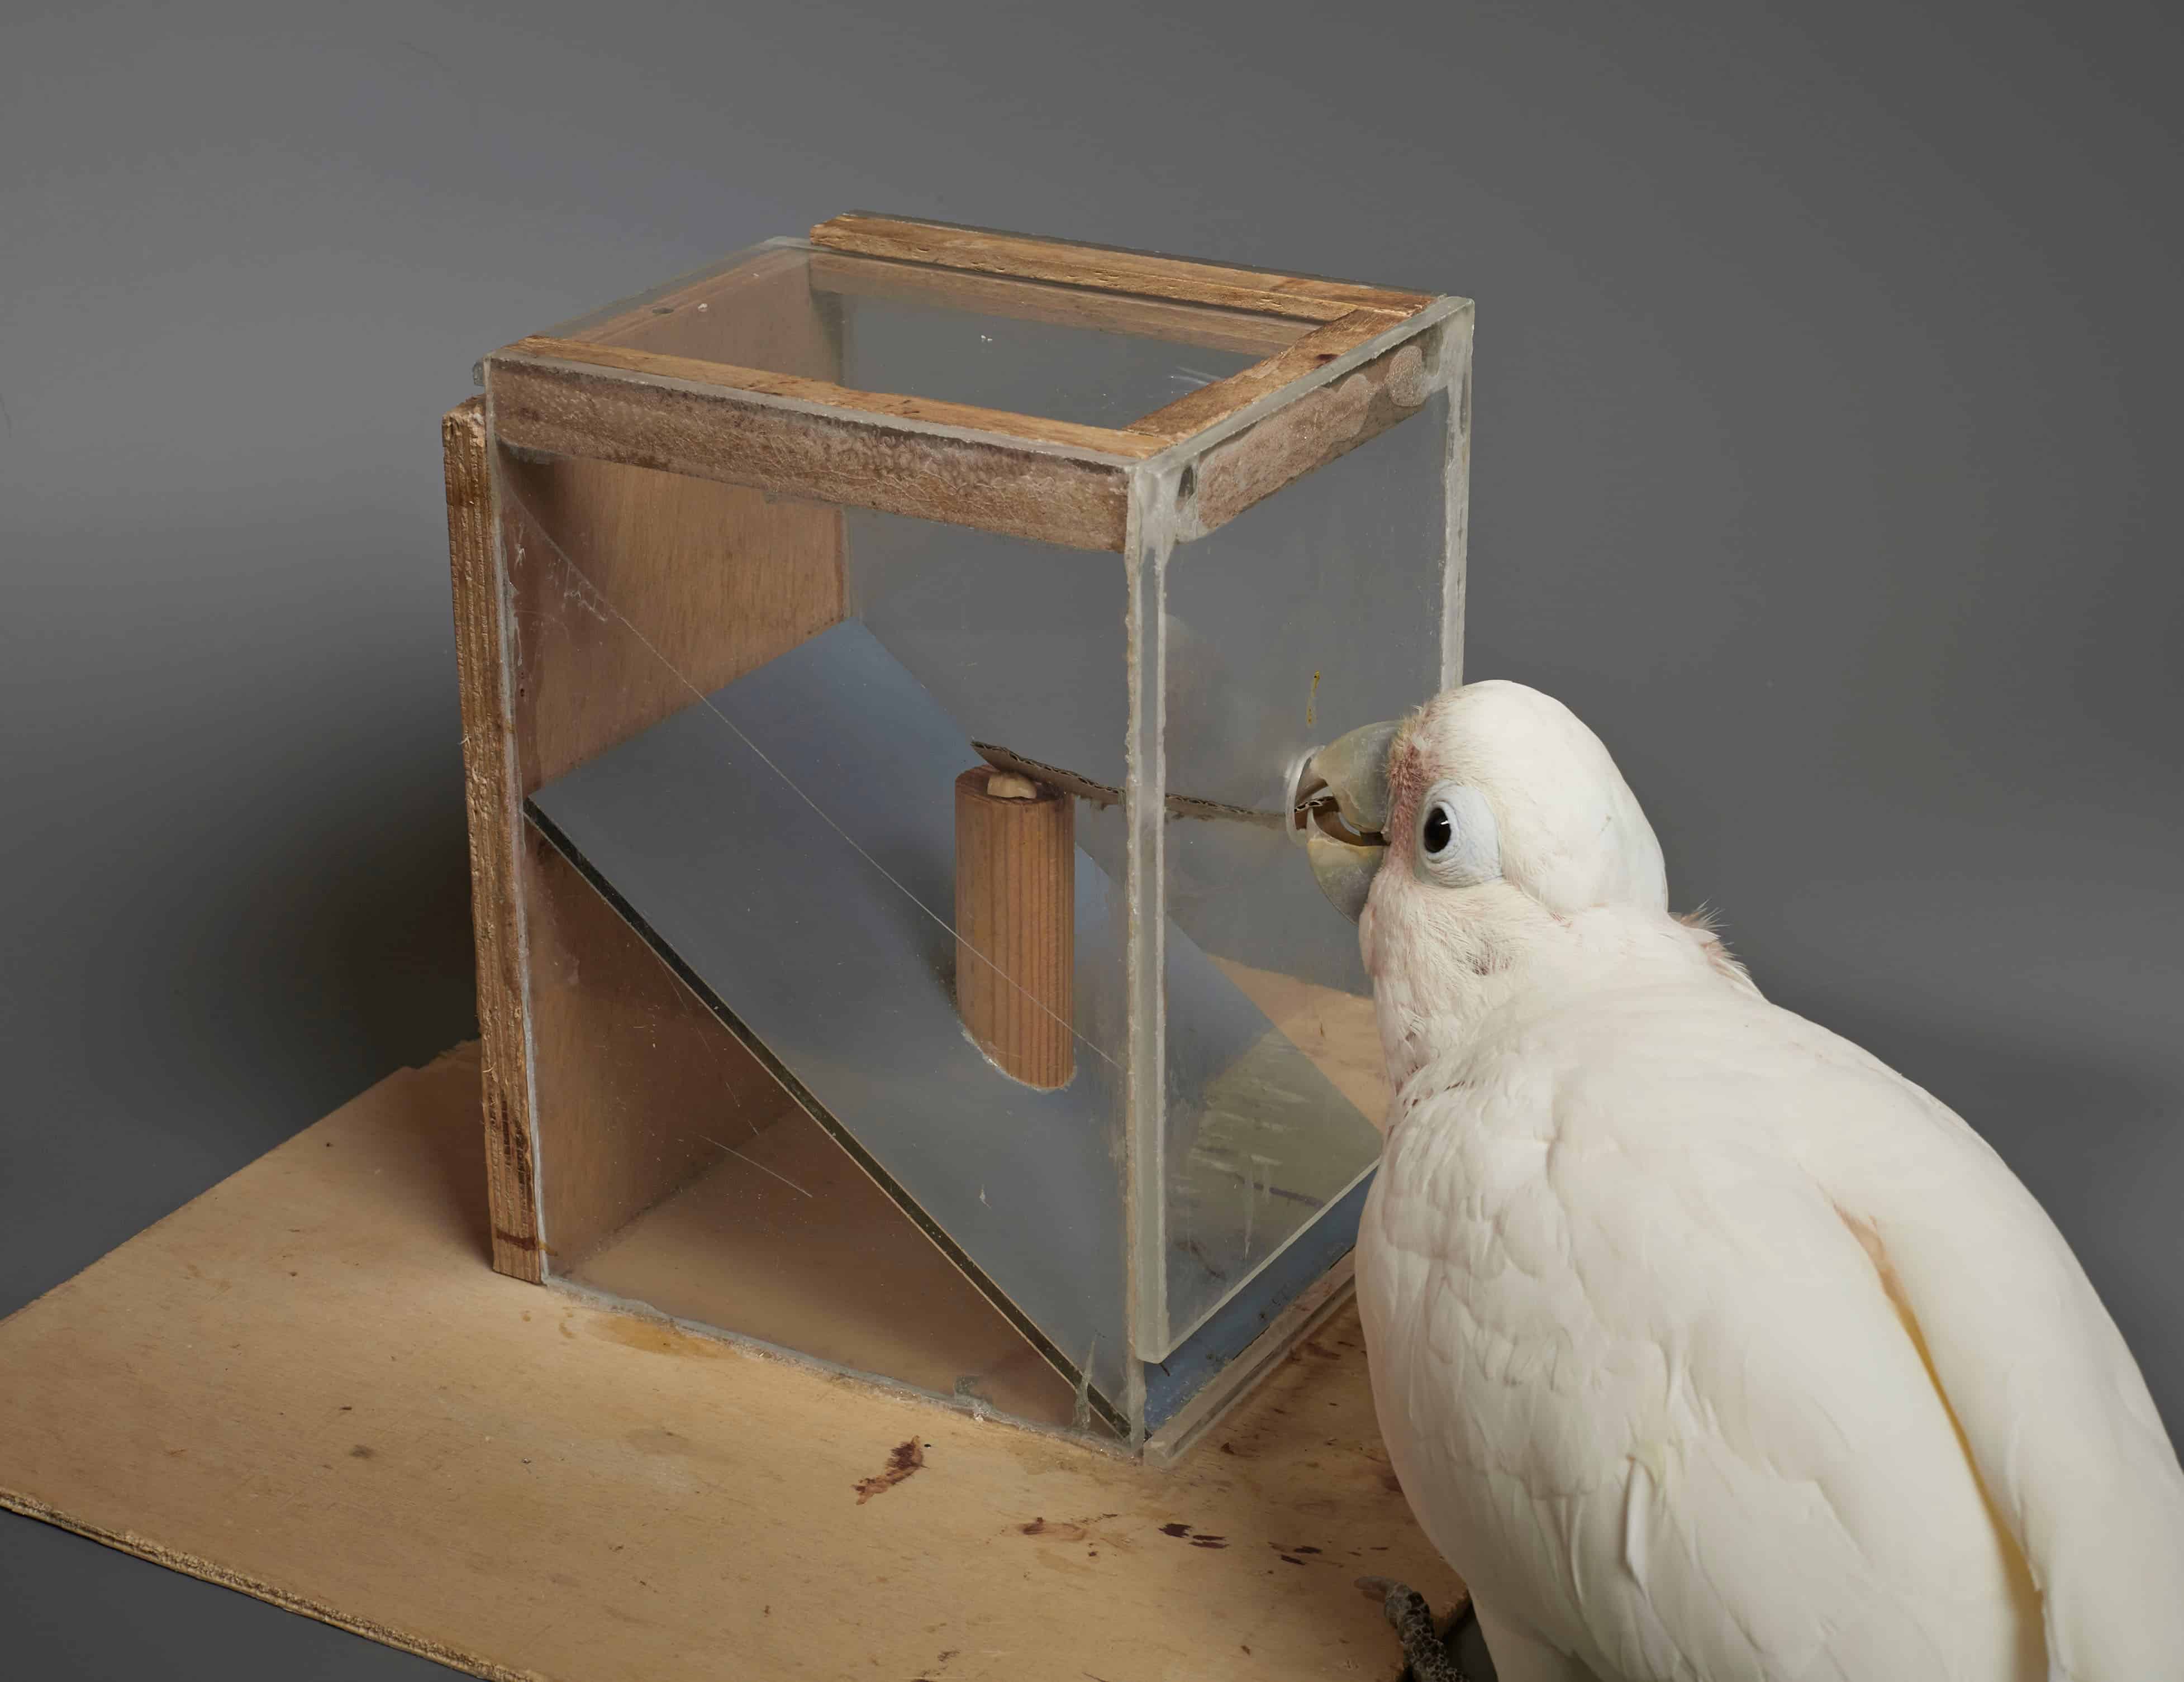 A Goffin cockatoo uses a cardboard tool to obtain food. Image credits: Goffin Lab, University of Veterinary Medicine Vienna.